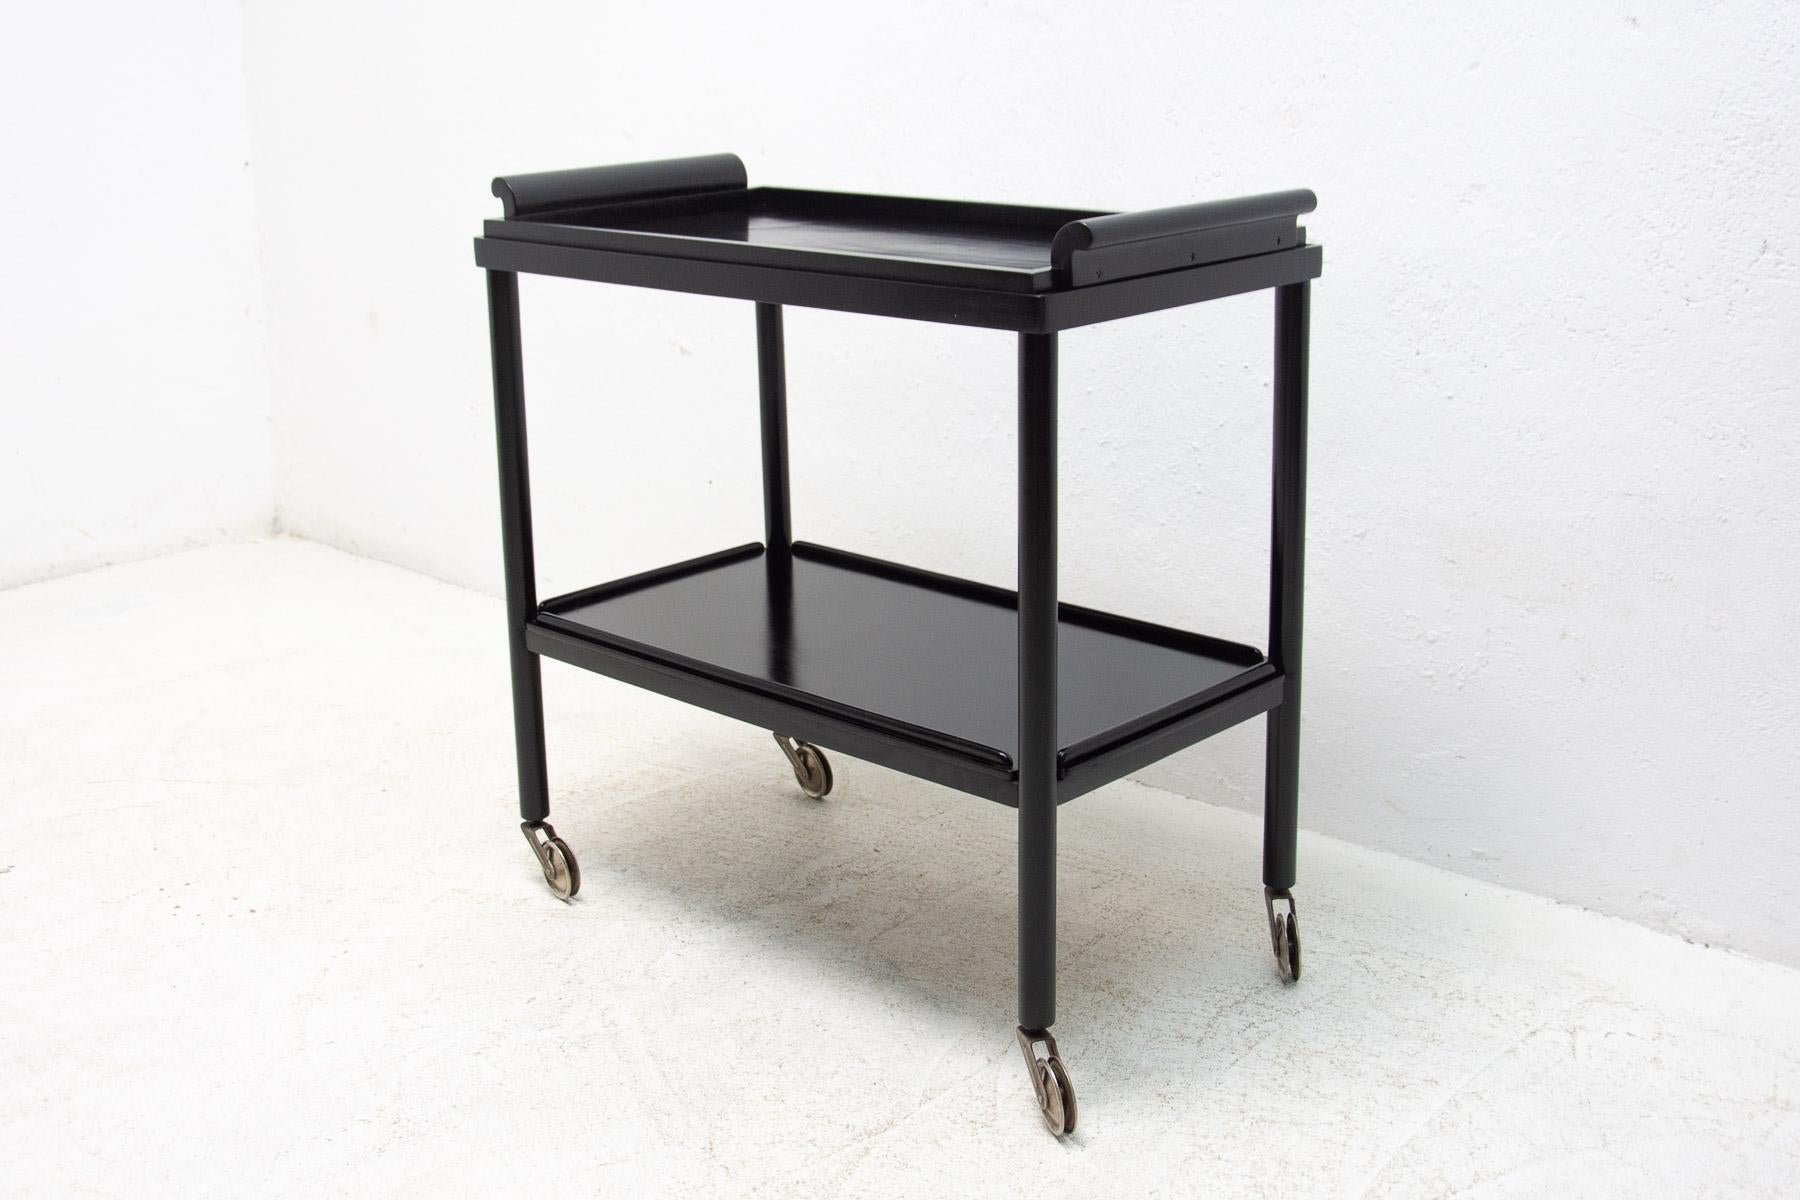 This Art Deco serving trolley catalogue No. T-359 was made in the 1930s by the Thonet Company. The table was completely refurbished so it´s in very good condition. The top plate is removable. It´s is made of dark stained beech wood. The THONET